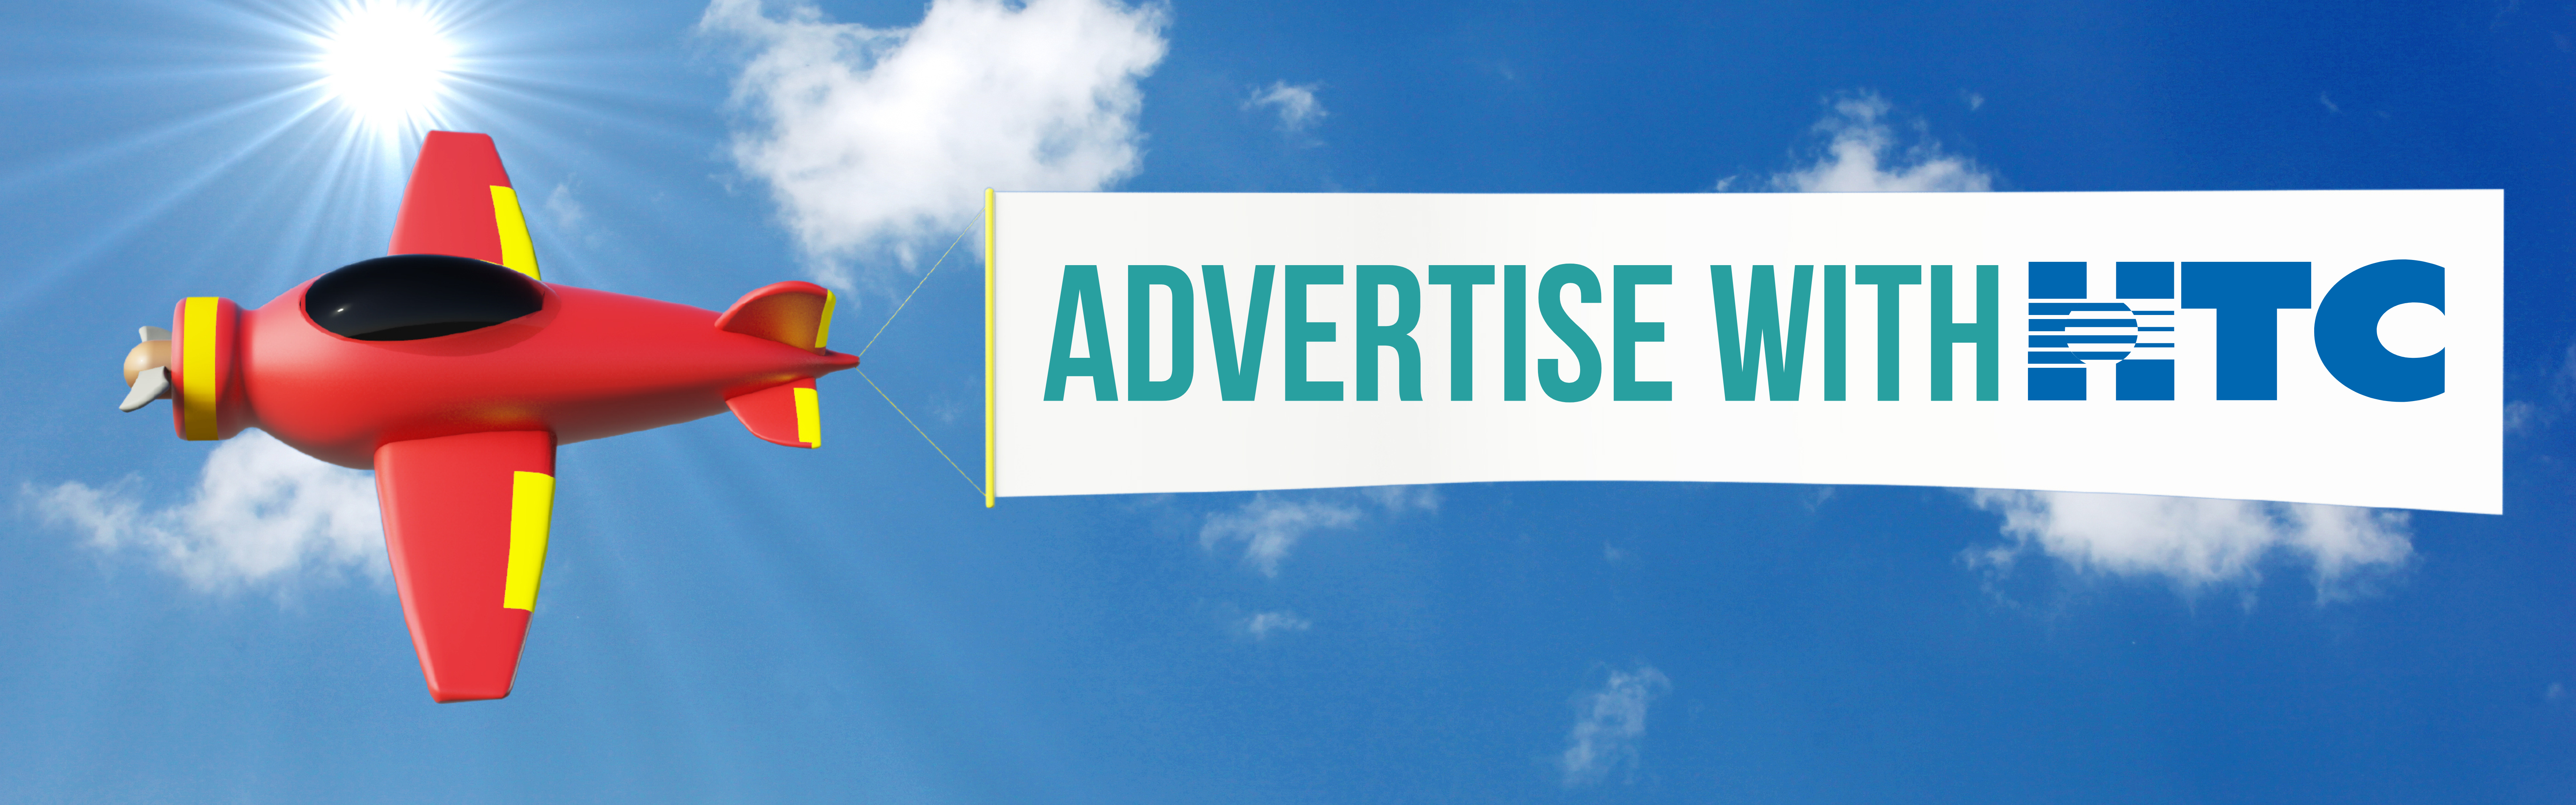 Advertise with HTC